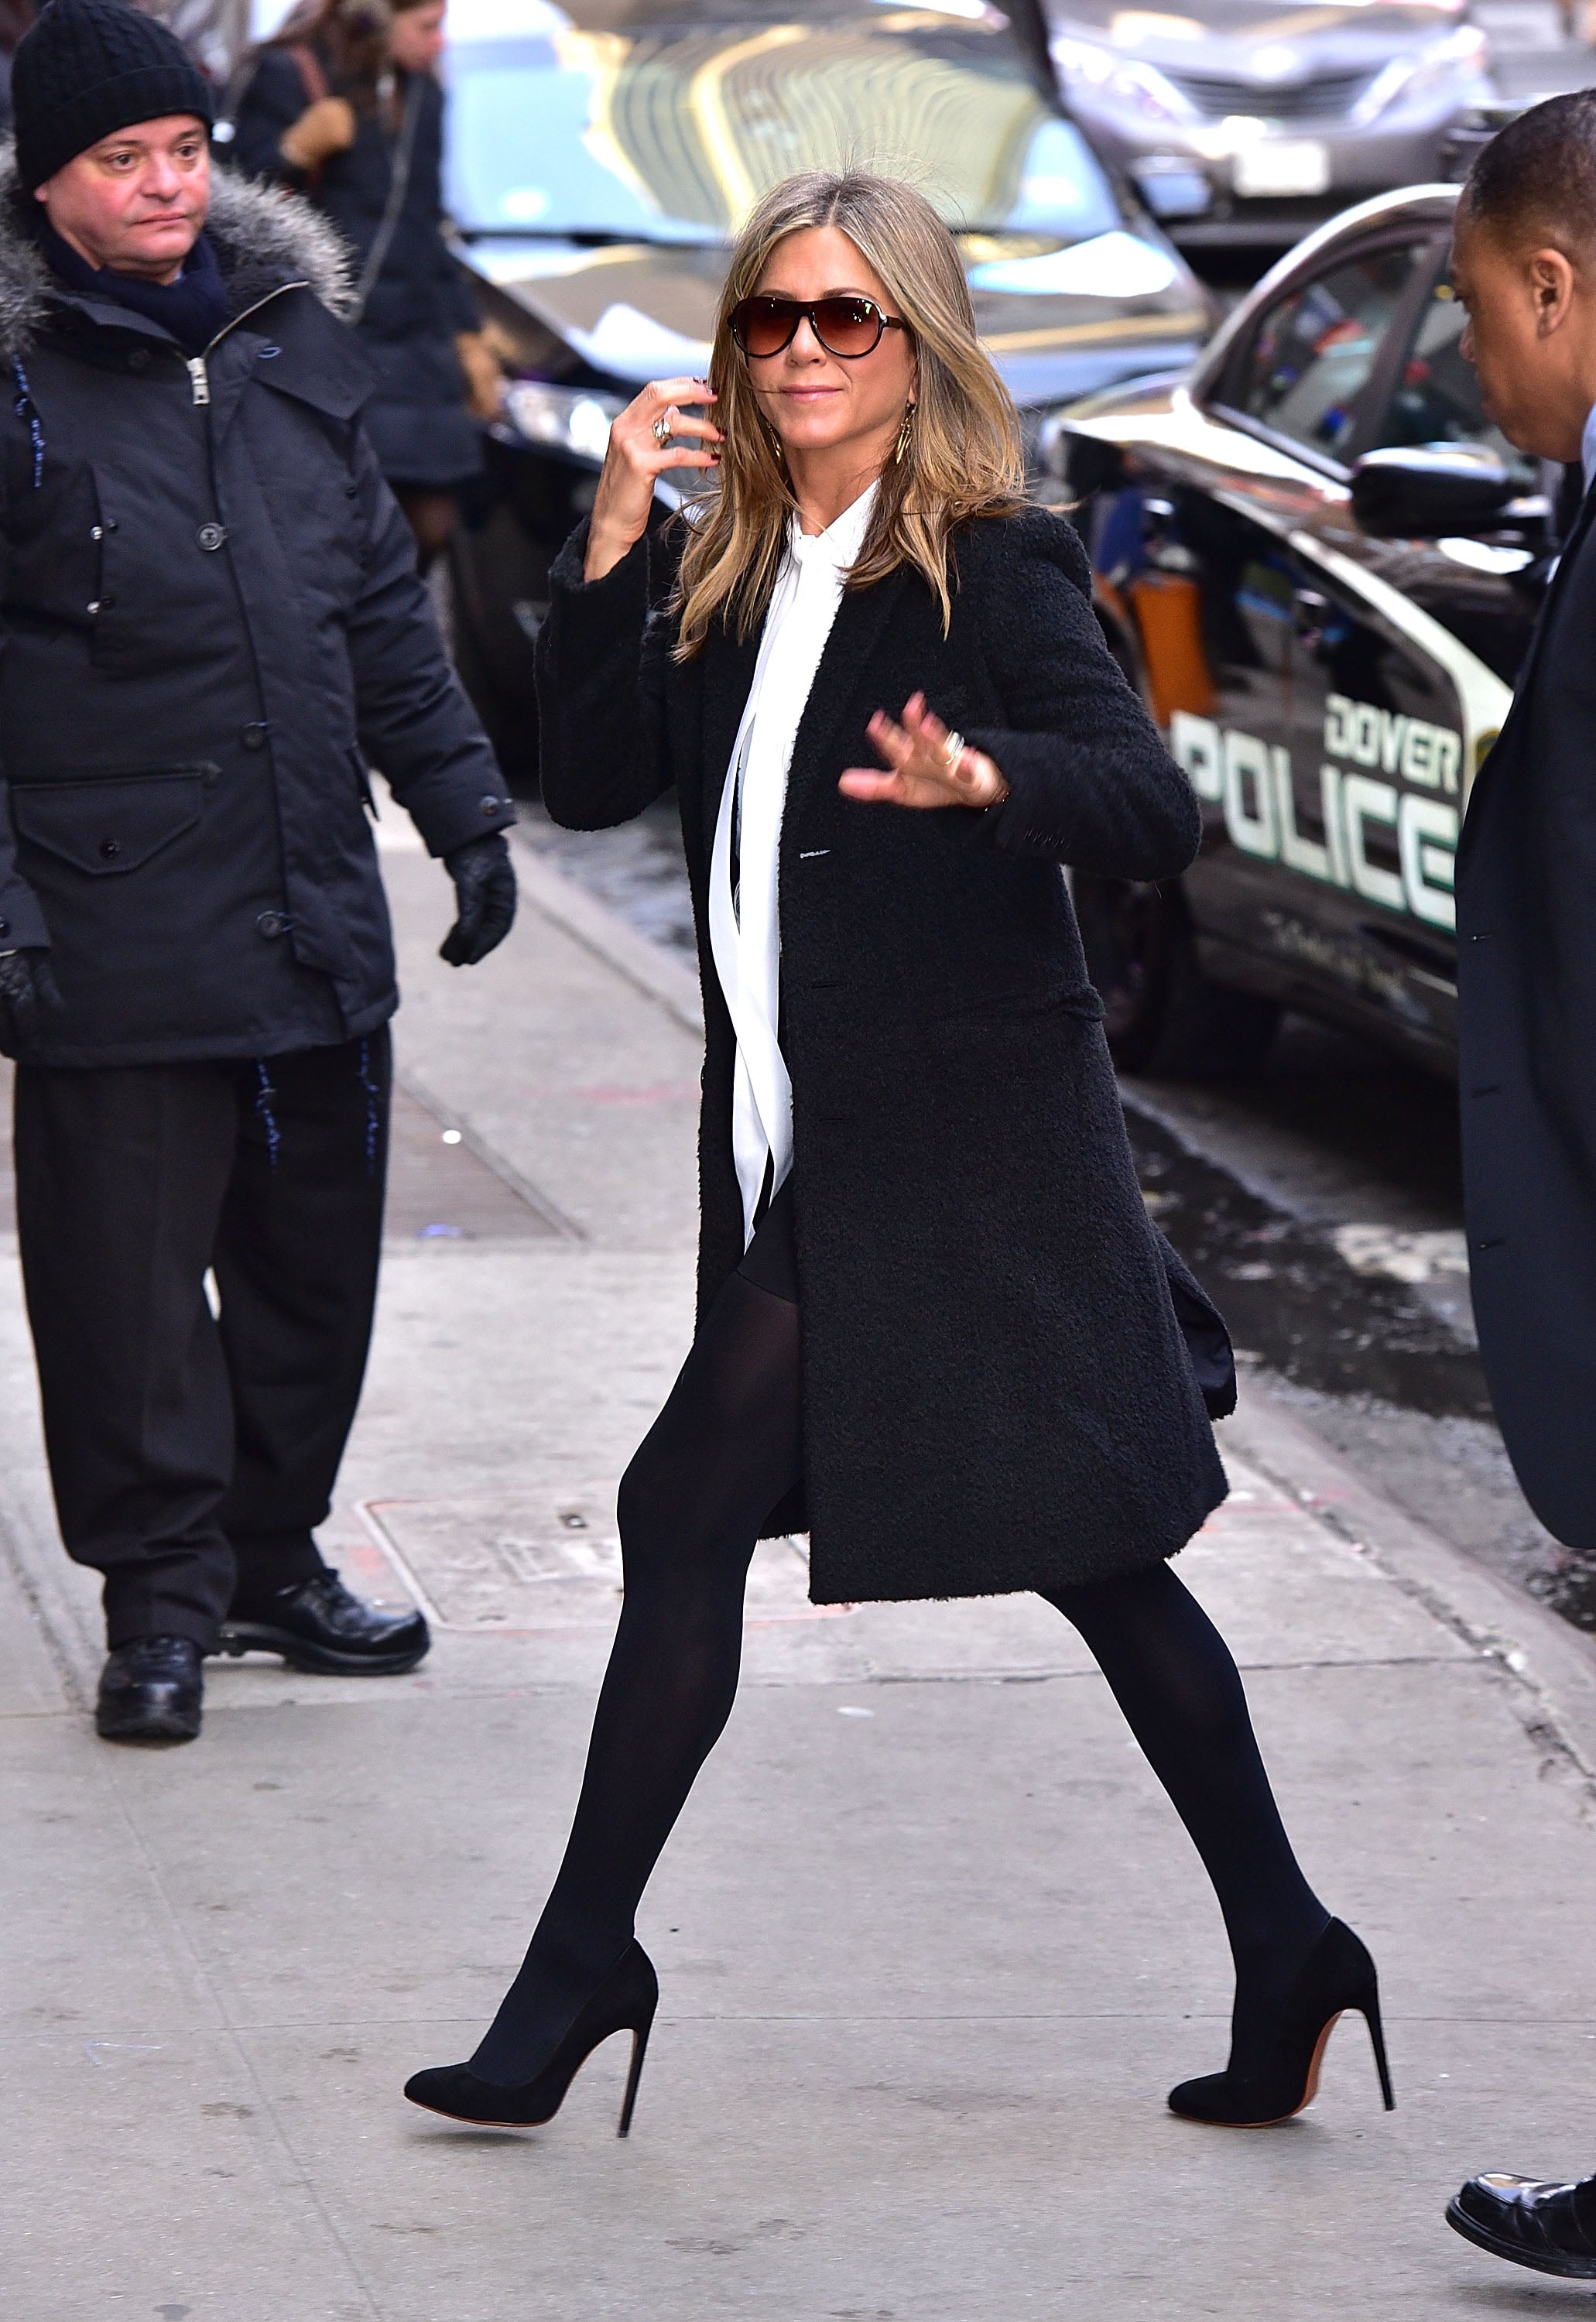 carolyn dover recommends jennifer aniston stockings pic